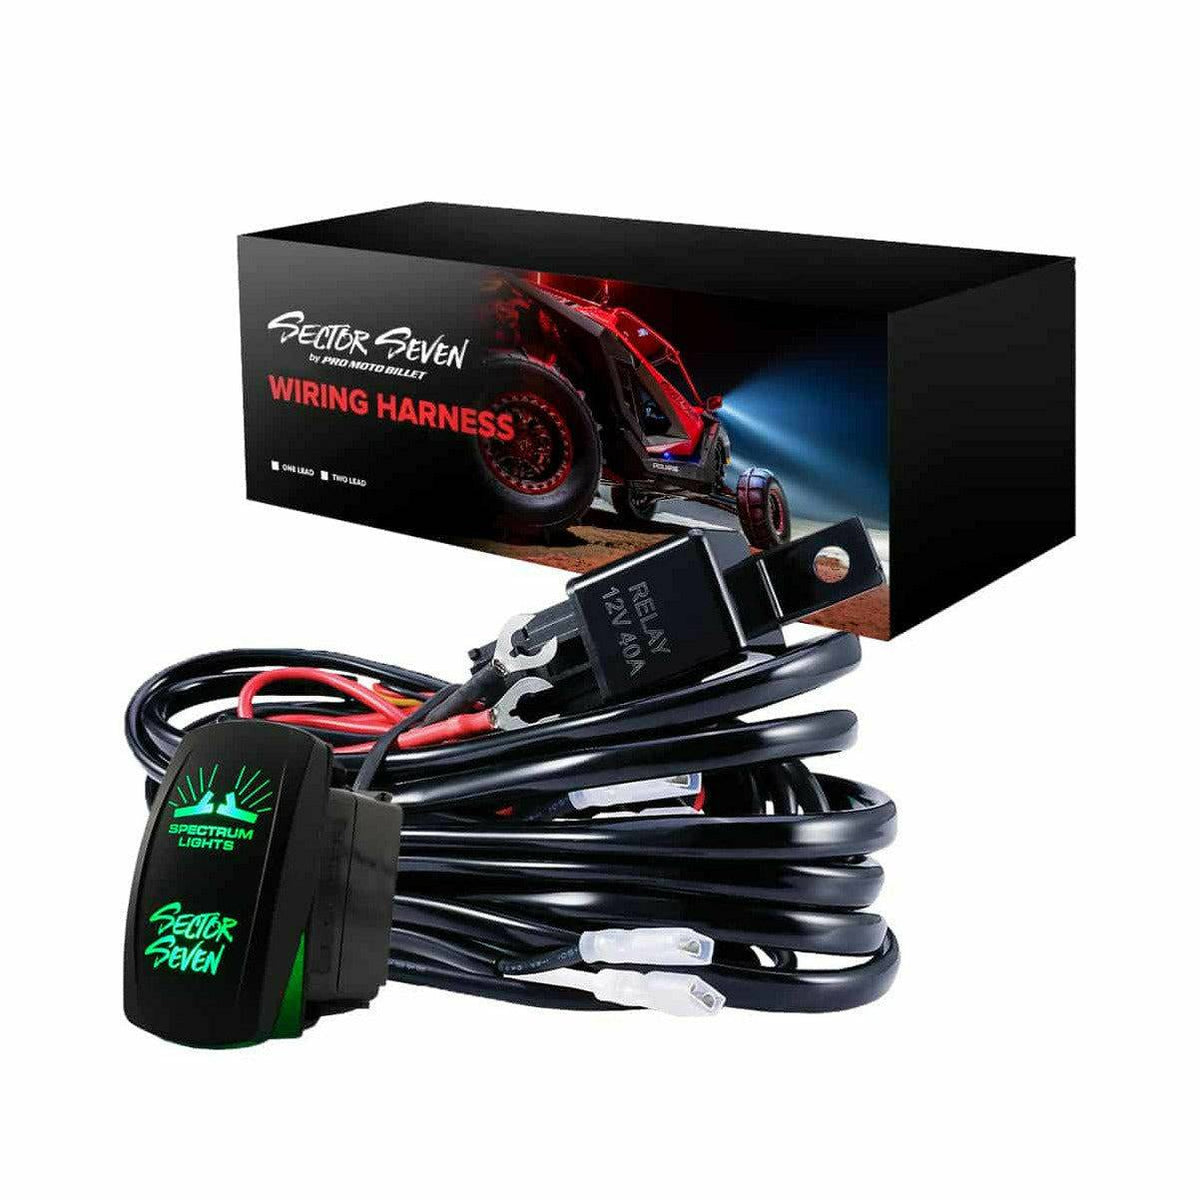 Sector Seven LED Wiring Harness Kit